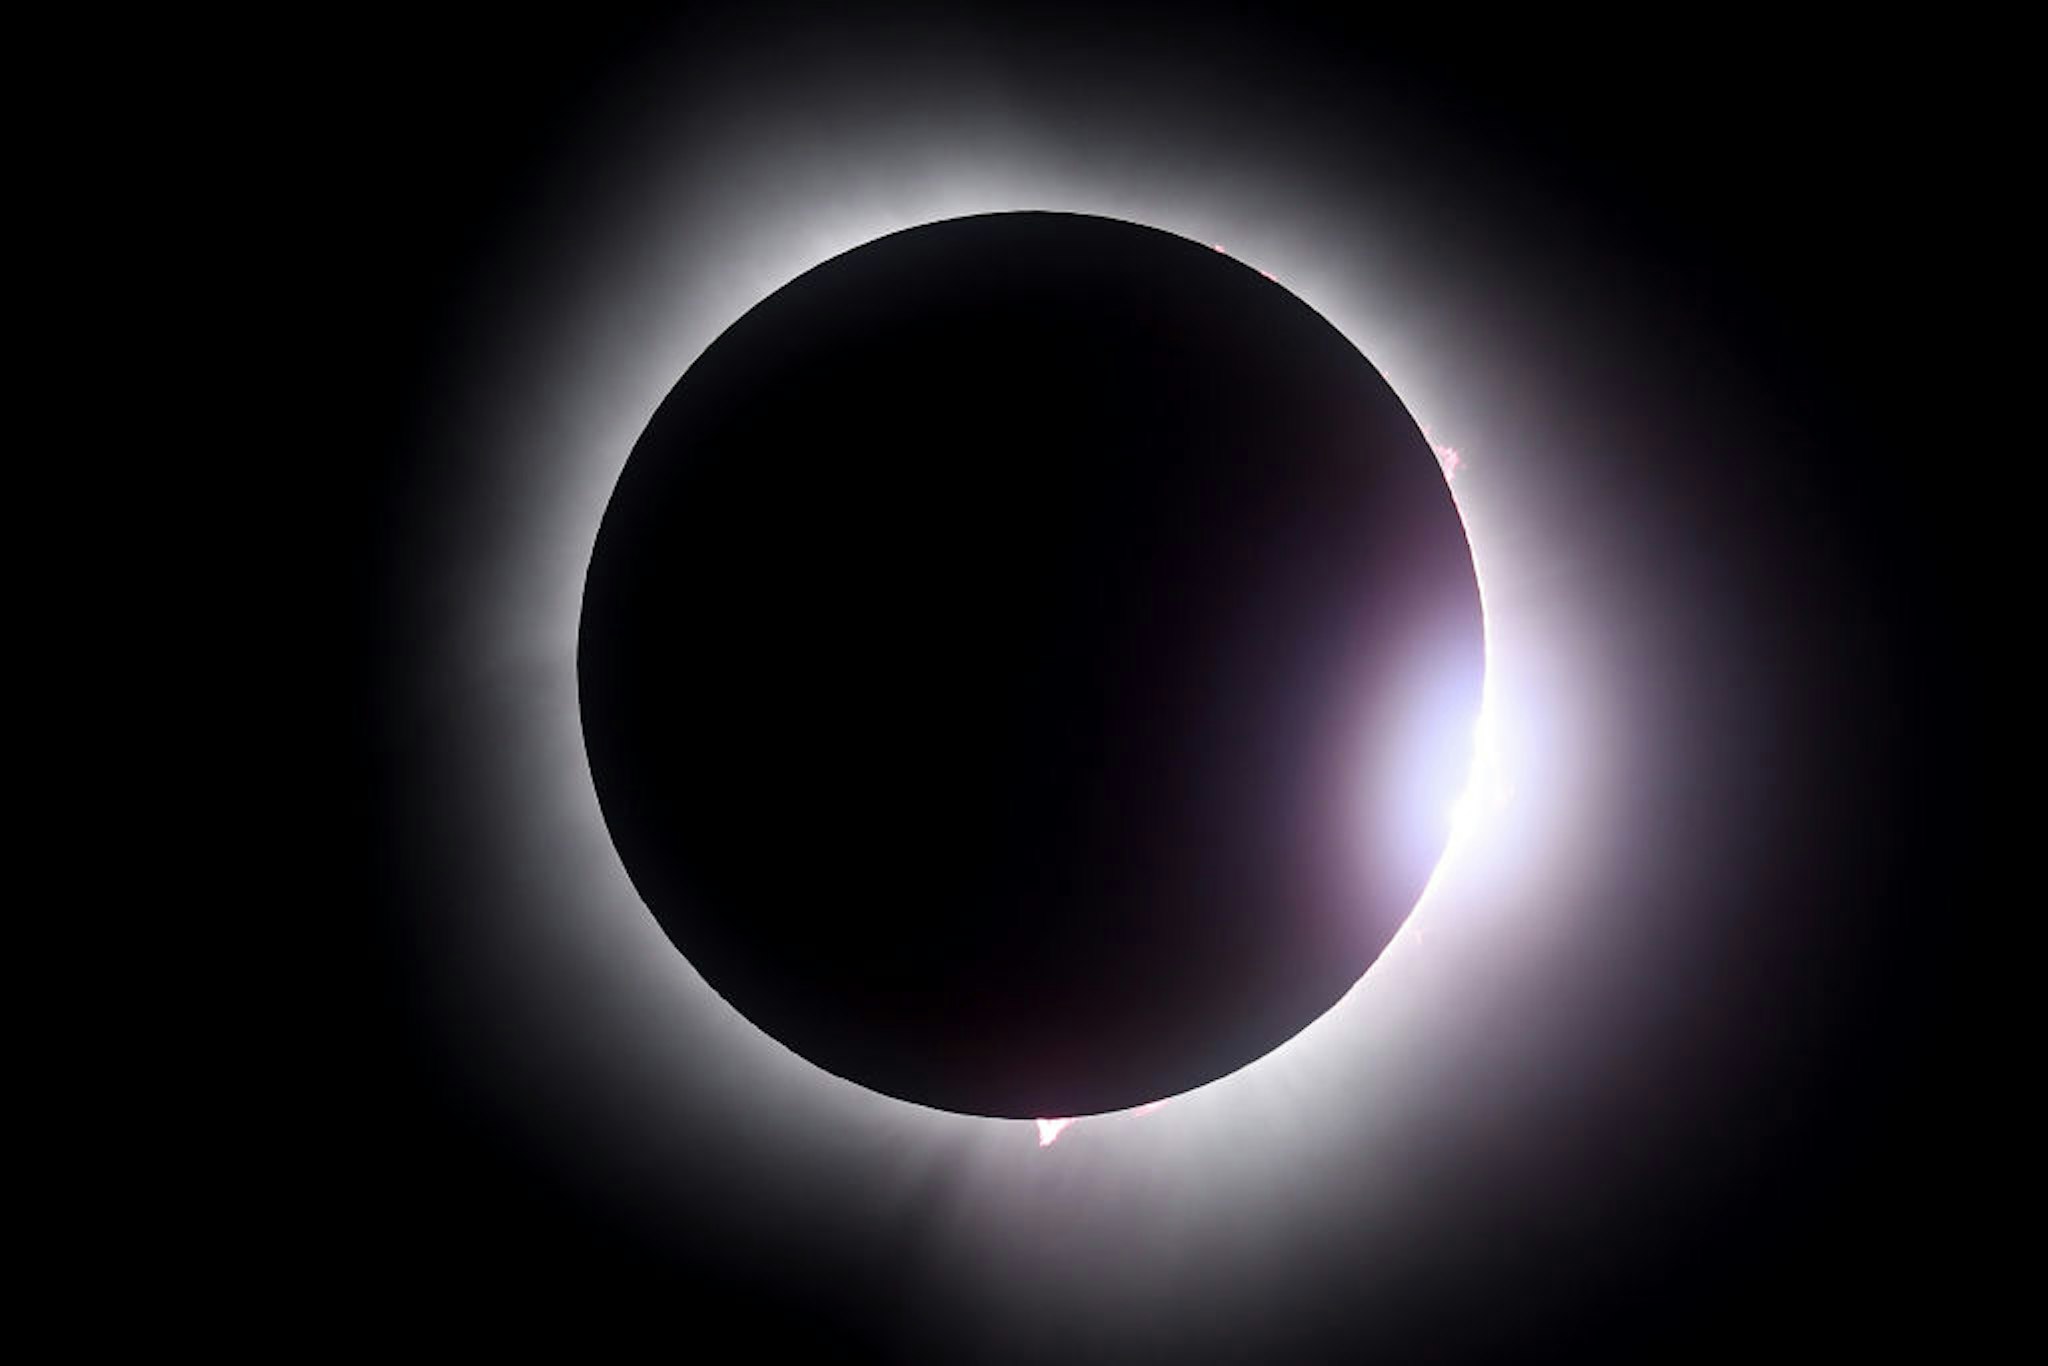 MARTIN, OHIO - APRIL 08: The moon passes in front of the sun during a solar eclipse on April 08, 2024 in Martin Ohio. Millions of people have flocked to areas across North America that are in the "path of totality" in order to experience a total solar eclipse. During the event, the moon will pass in between the sun and the Earth, appearing to block the sun. (Photo by Gregory Shamus/Getty Images)